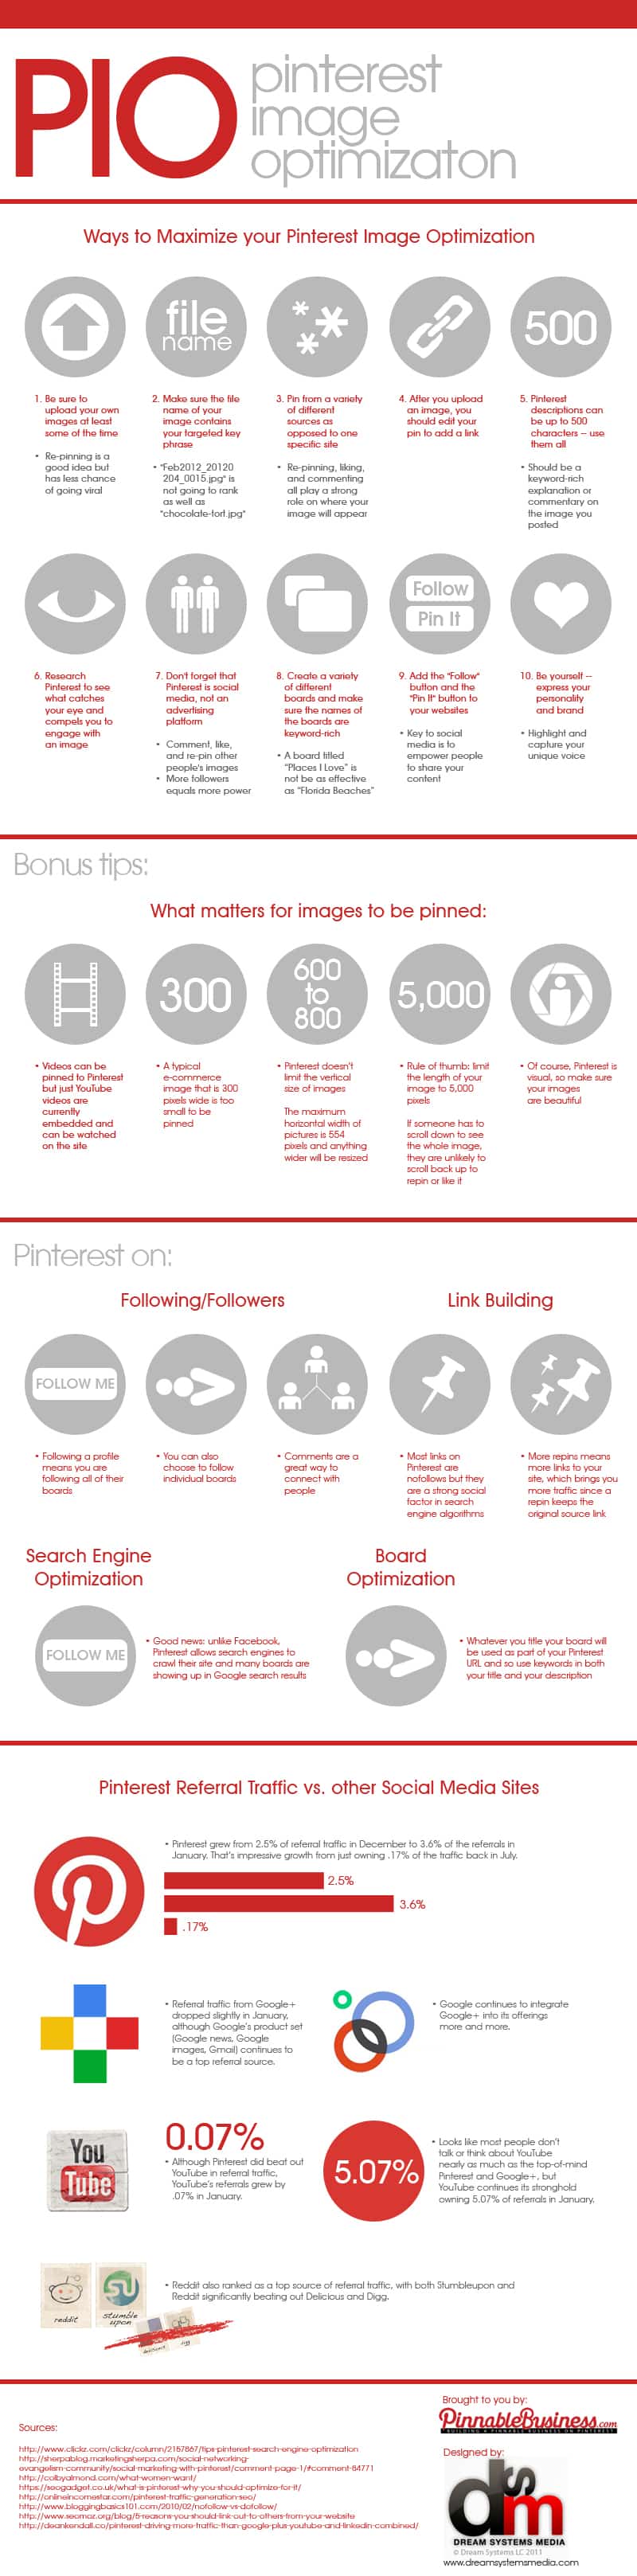 Get Repinned: Pinterest Image Optimization Guide [Infographic]